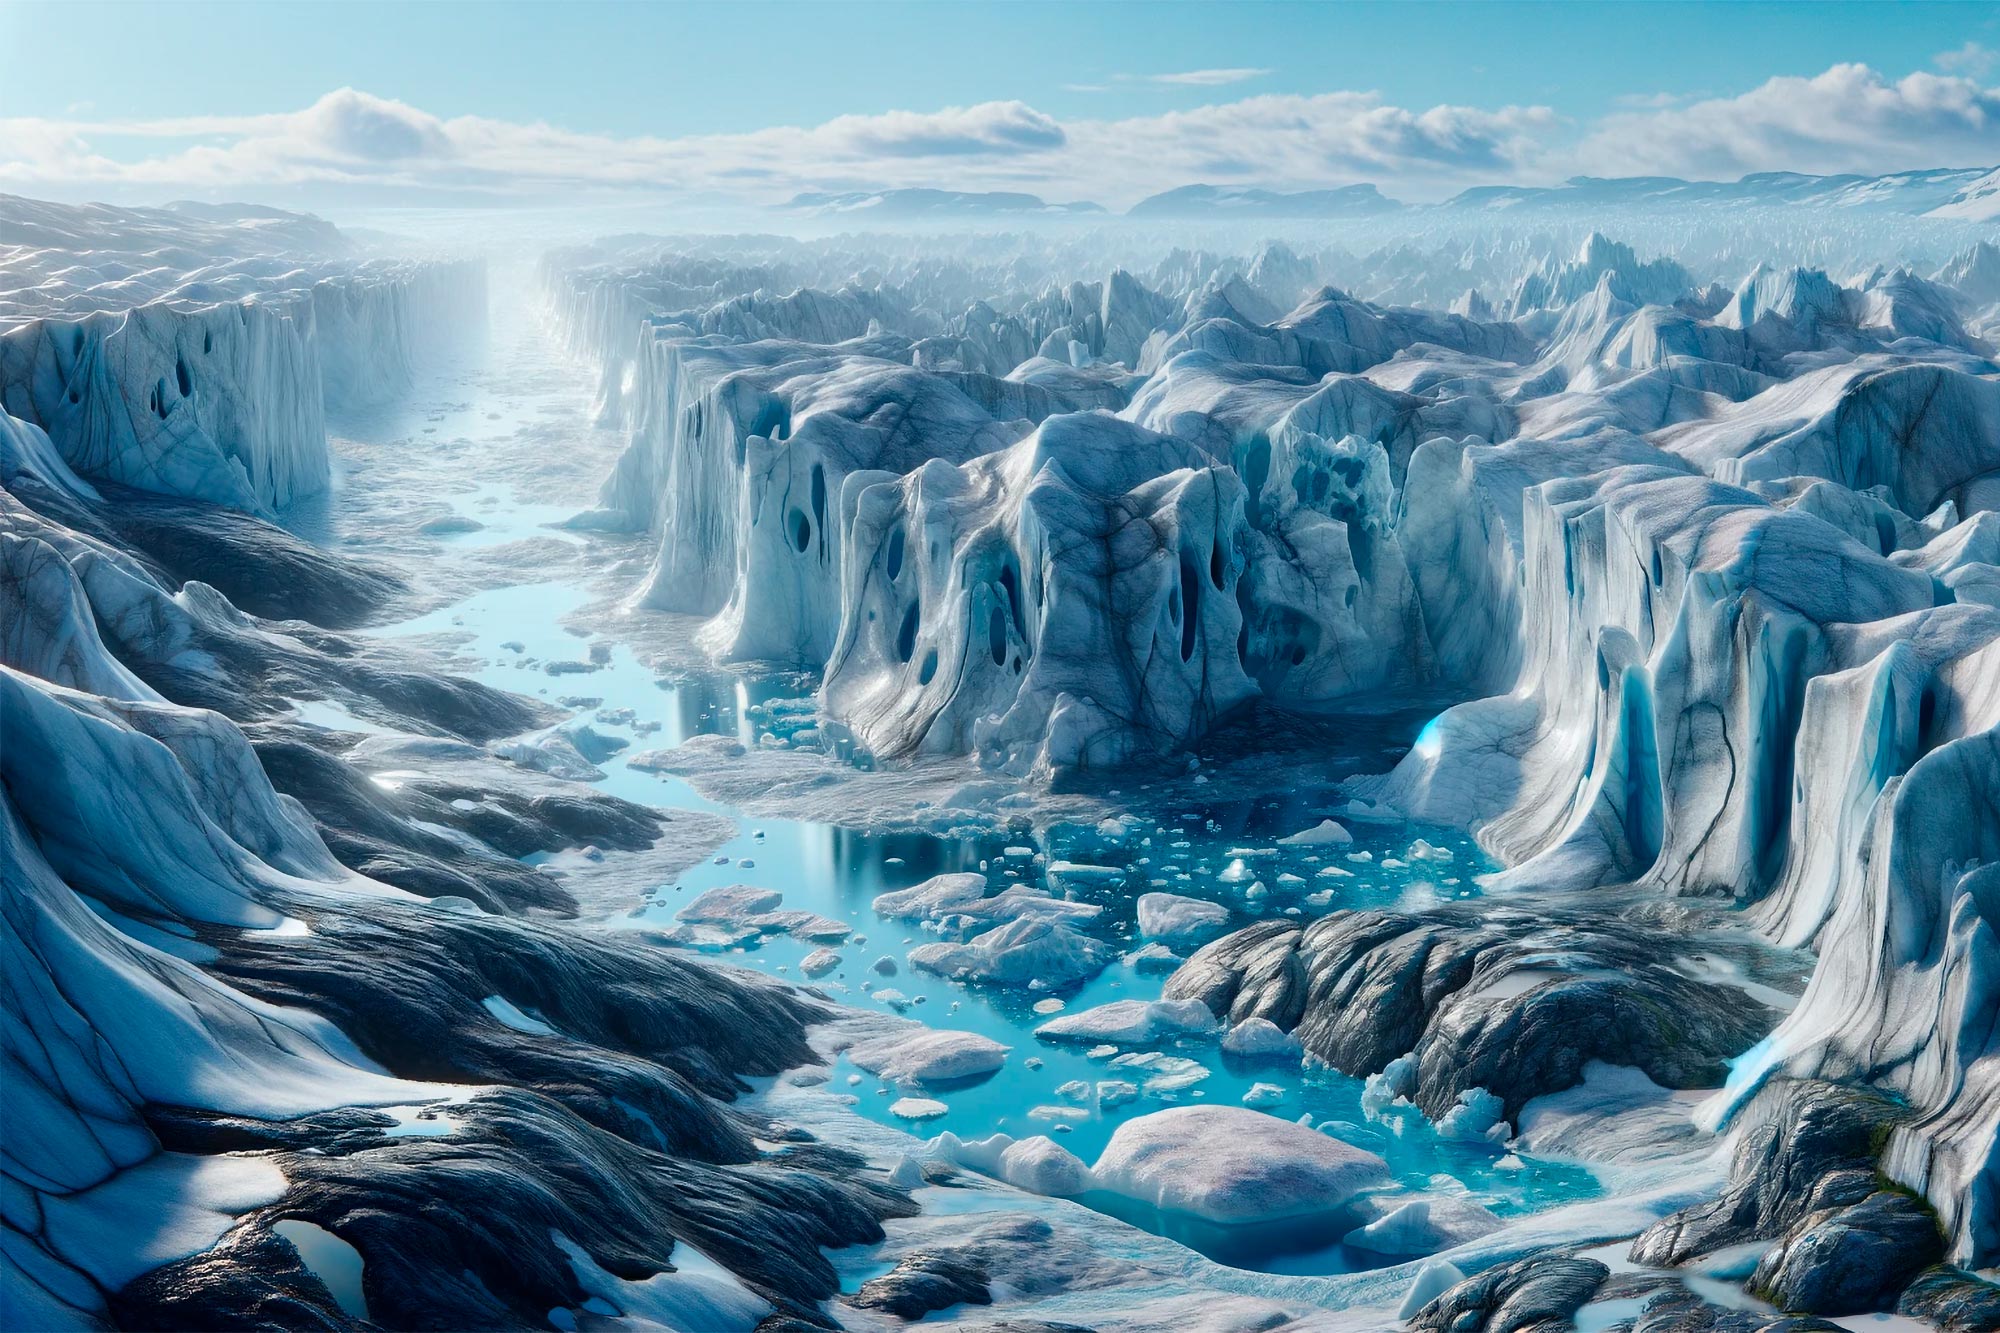 Greenland’s Glacier Retreat Doubled in 20 Years